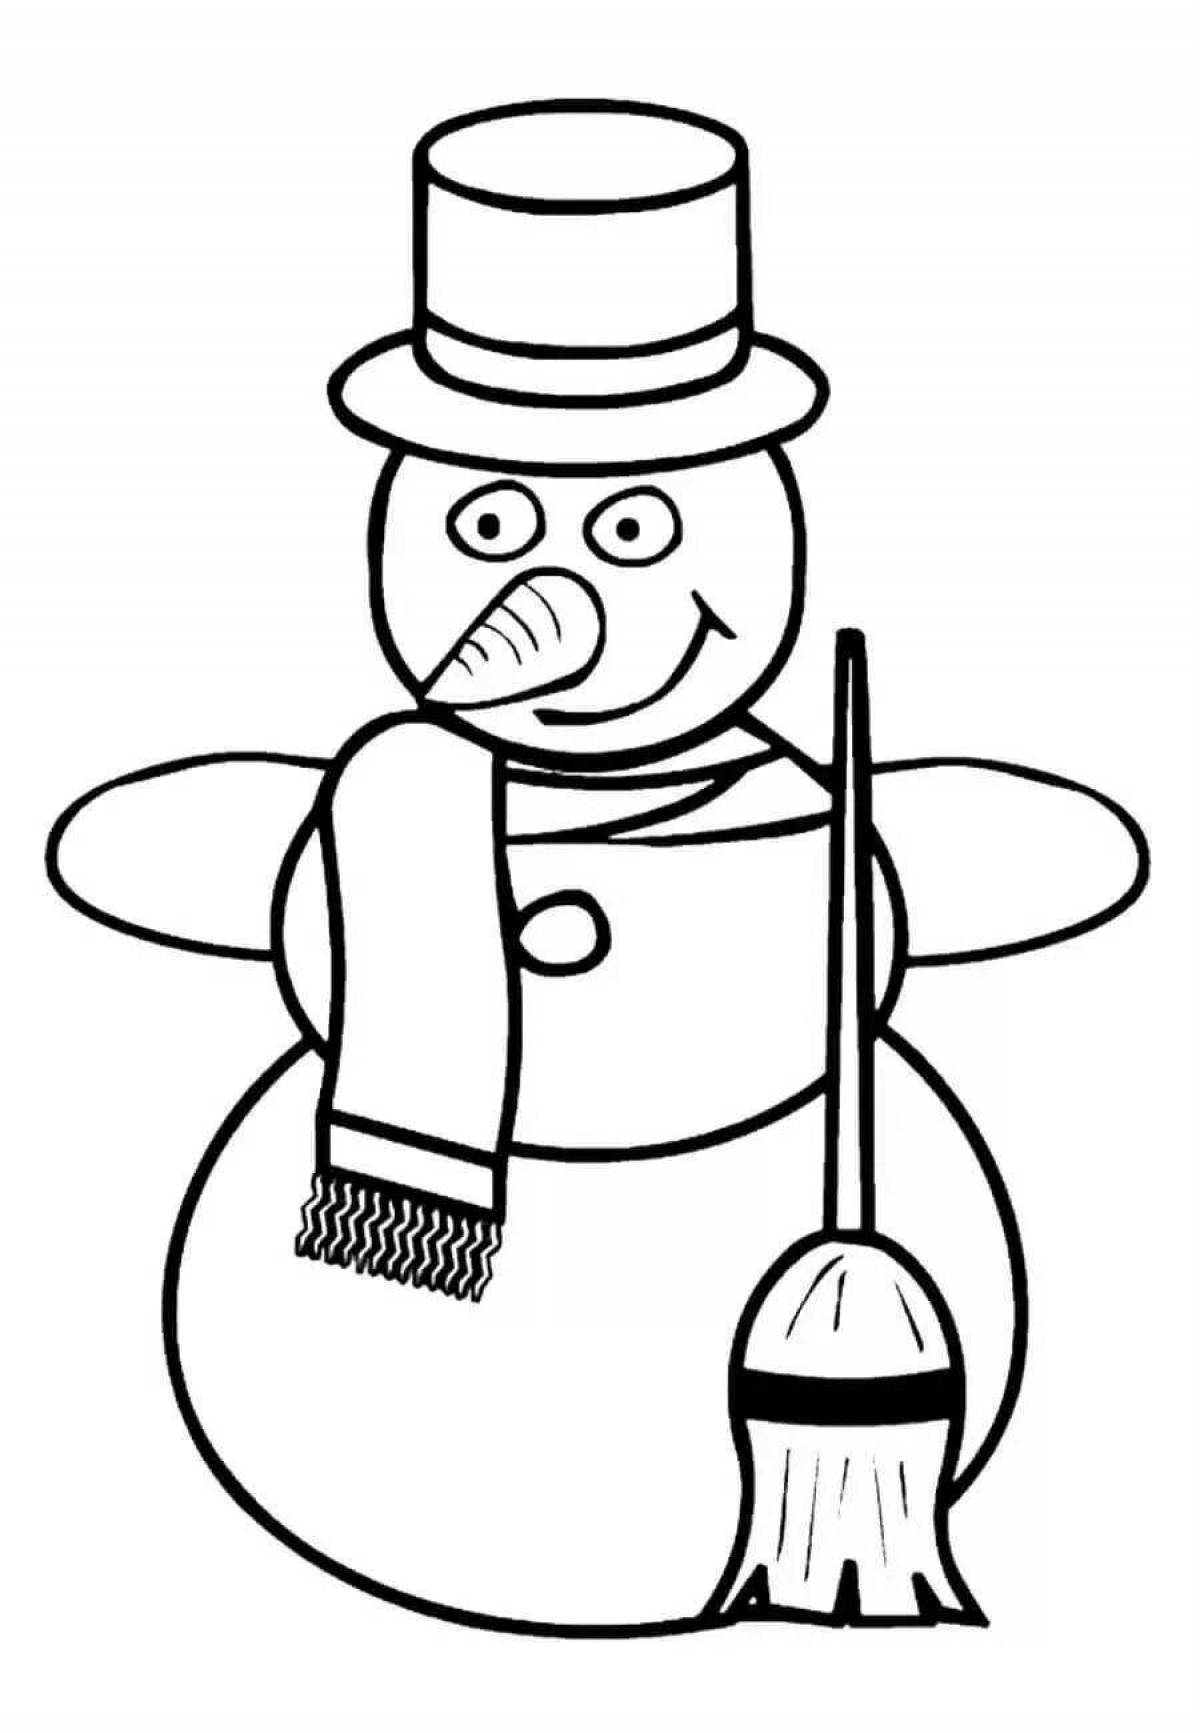 Amazing big snowman coloring page